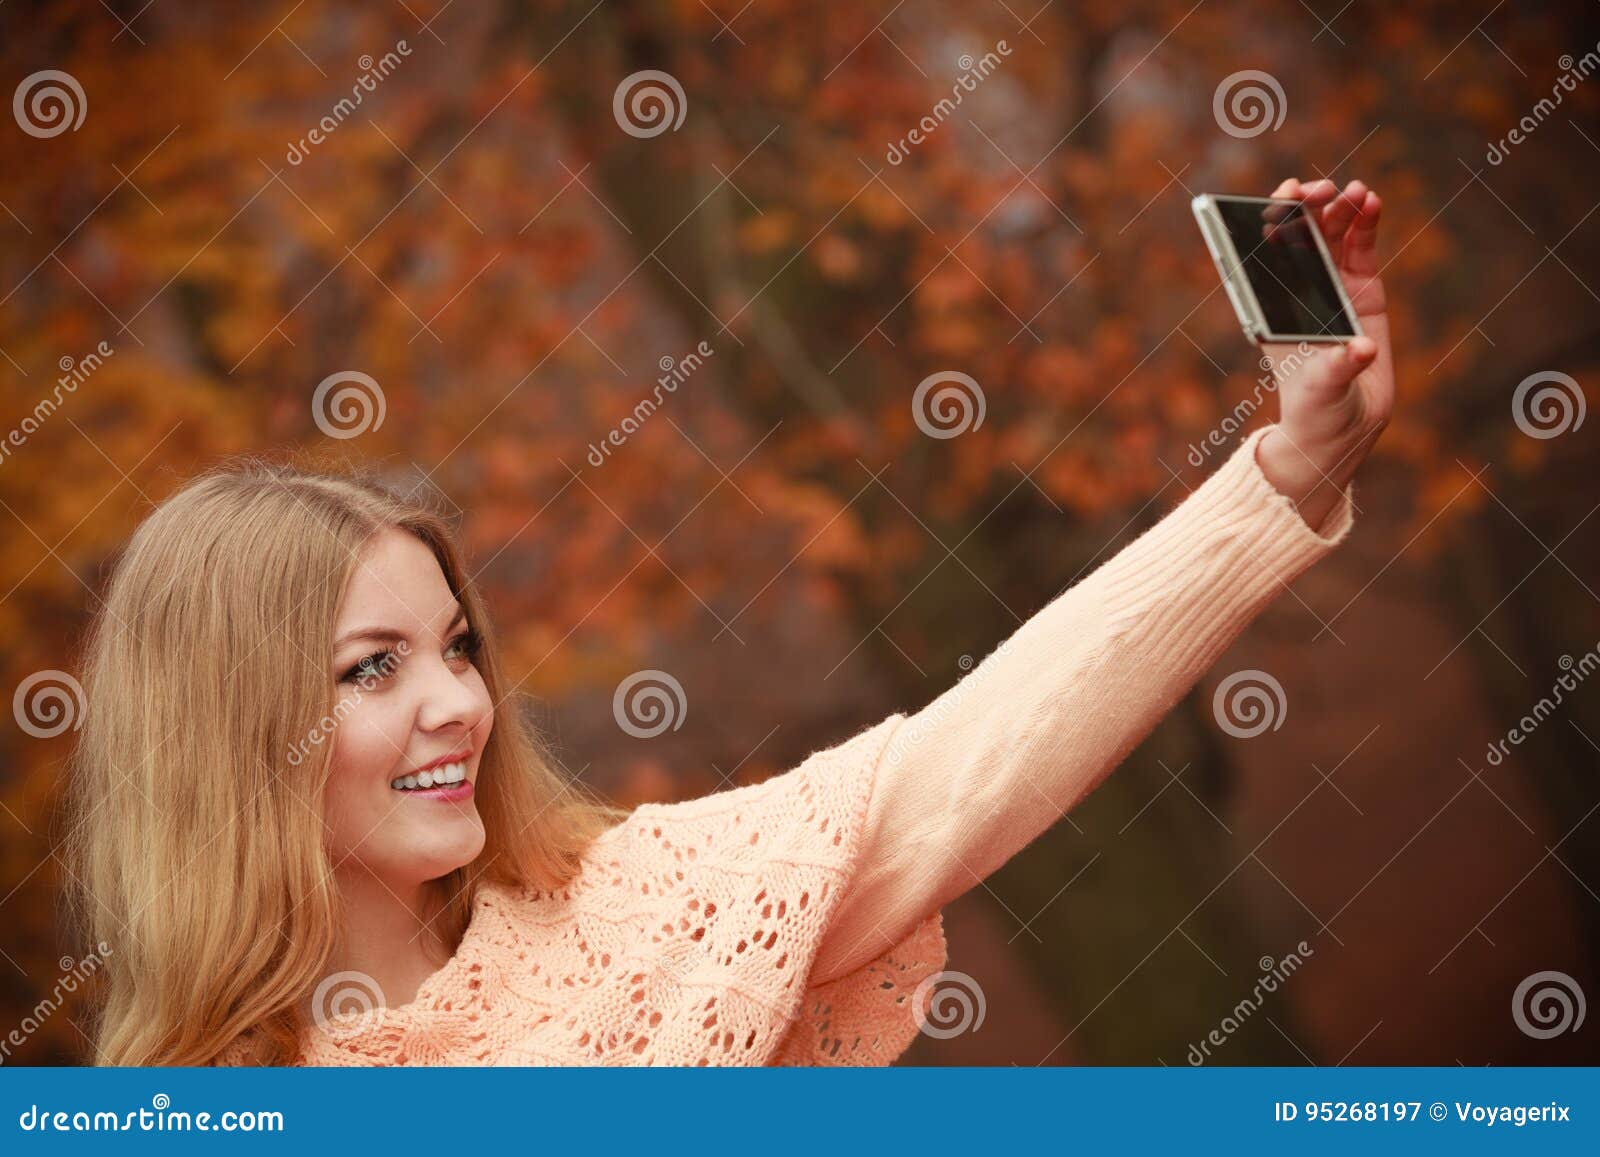 Blonde girl taking a selfie with her hair down - wide 10